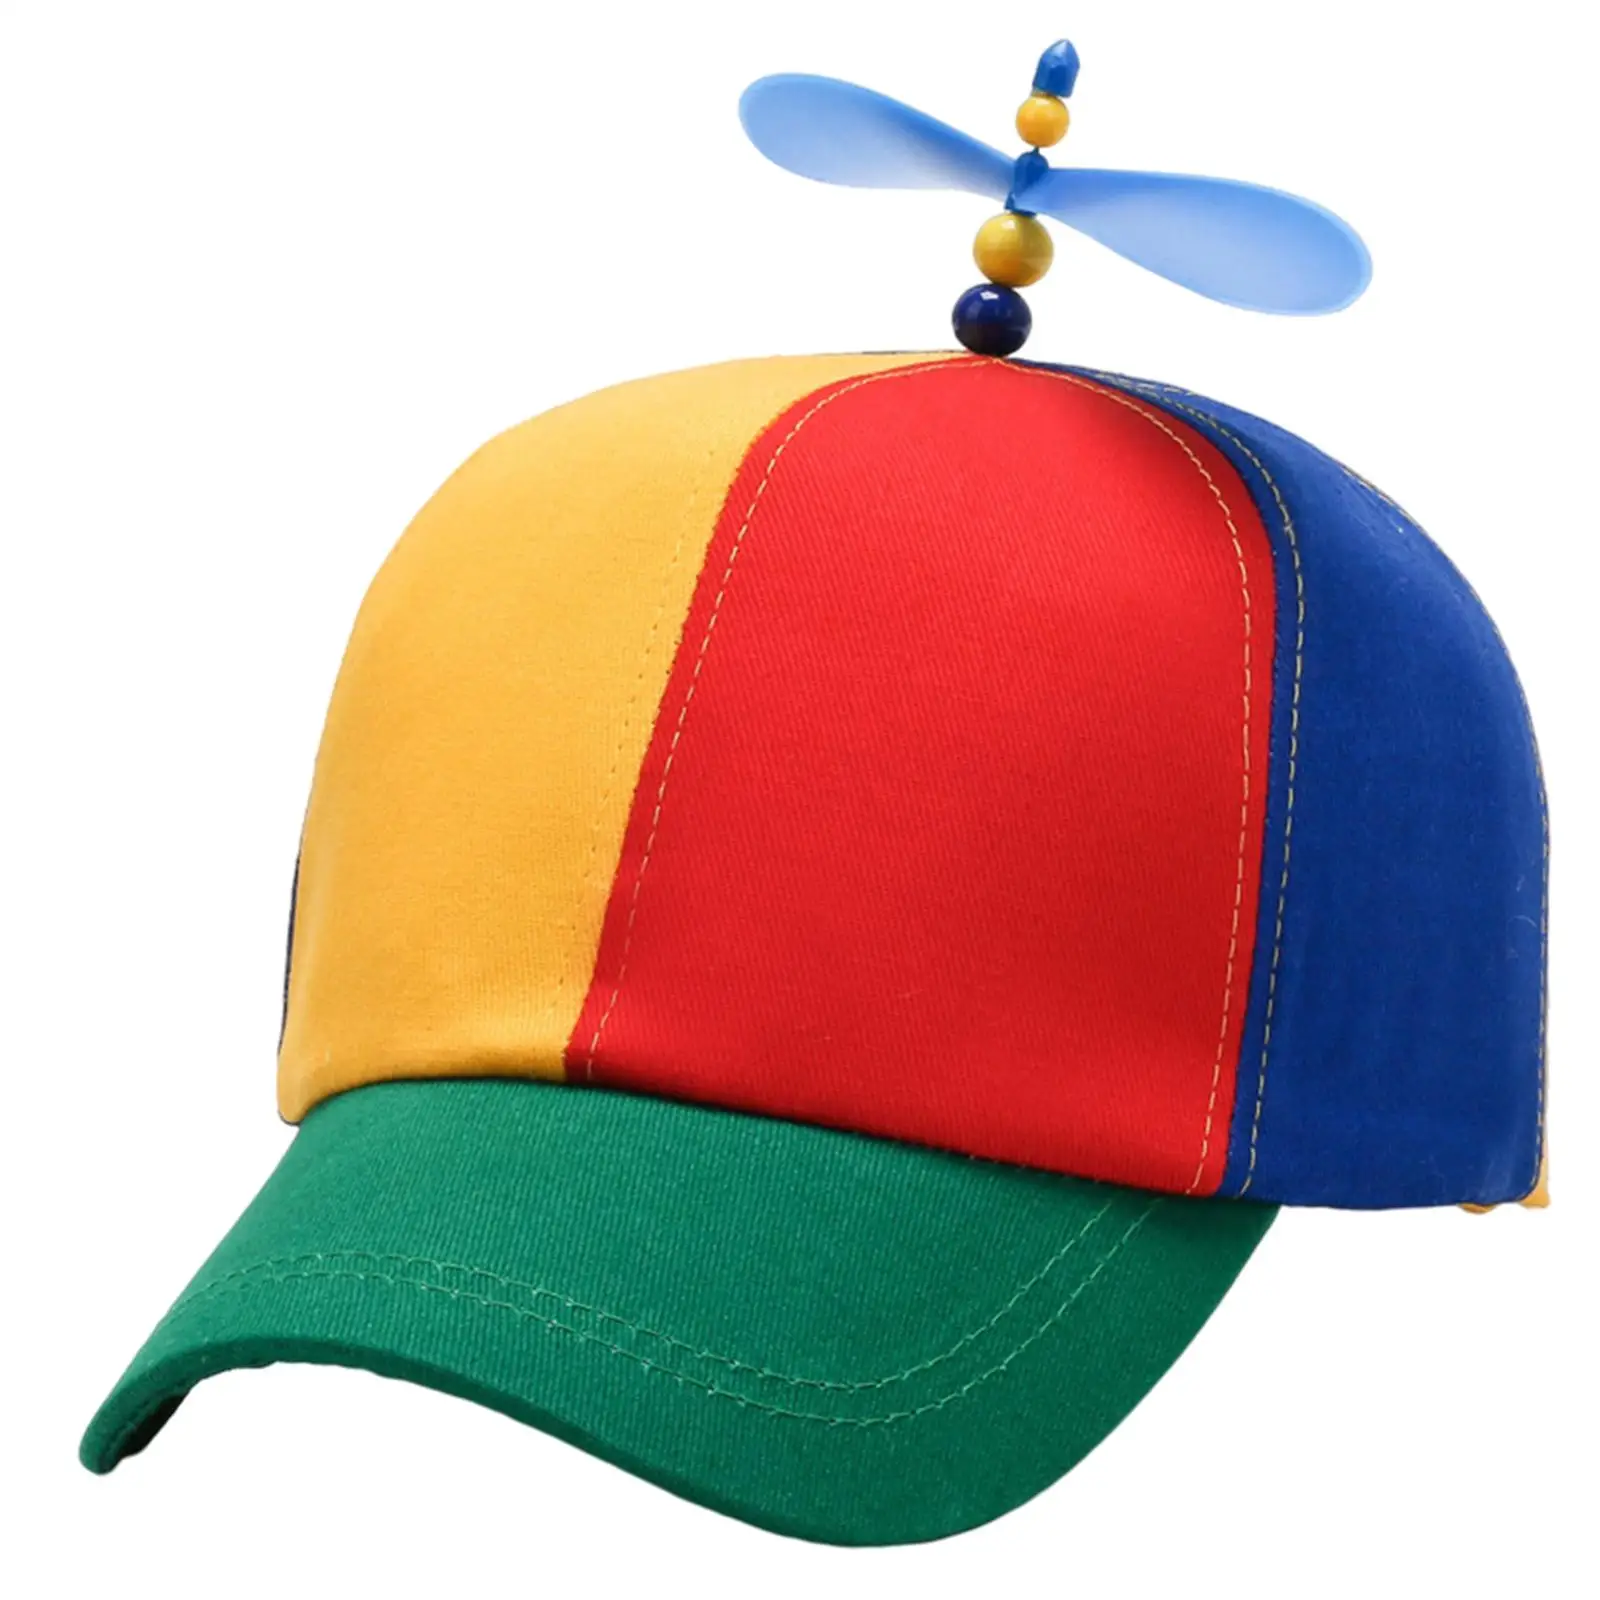 Propeller Hat, Adjustable Size Party Hat Fashion Funny Decoration Novelty Baseball Hat for Outdoor Sports Women Girl Adult